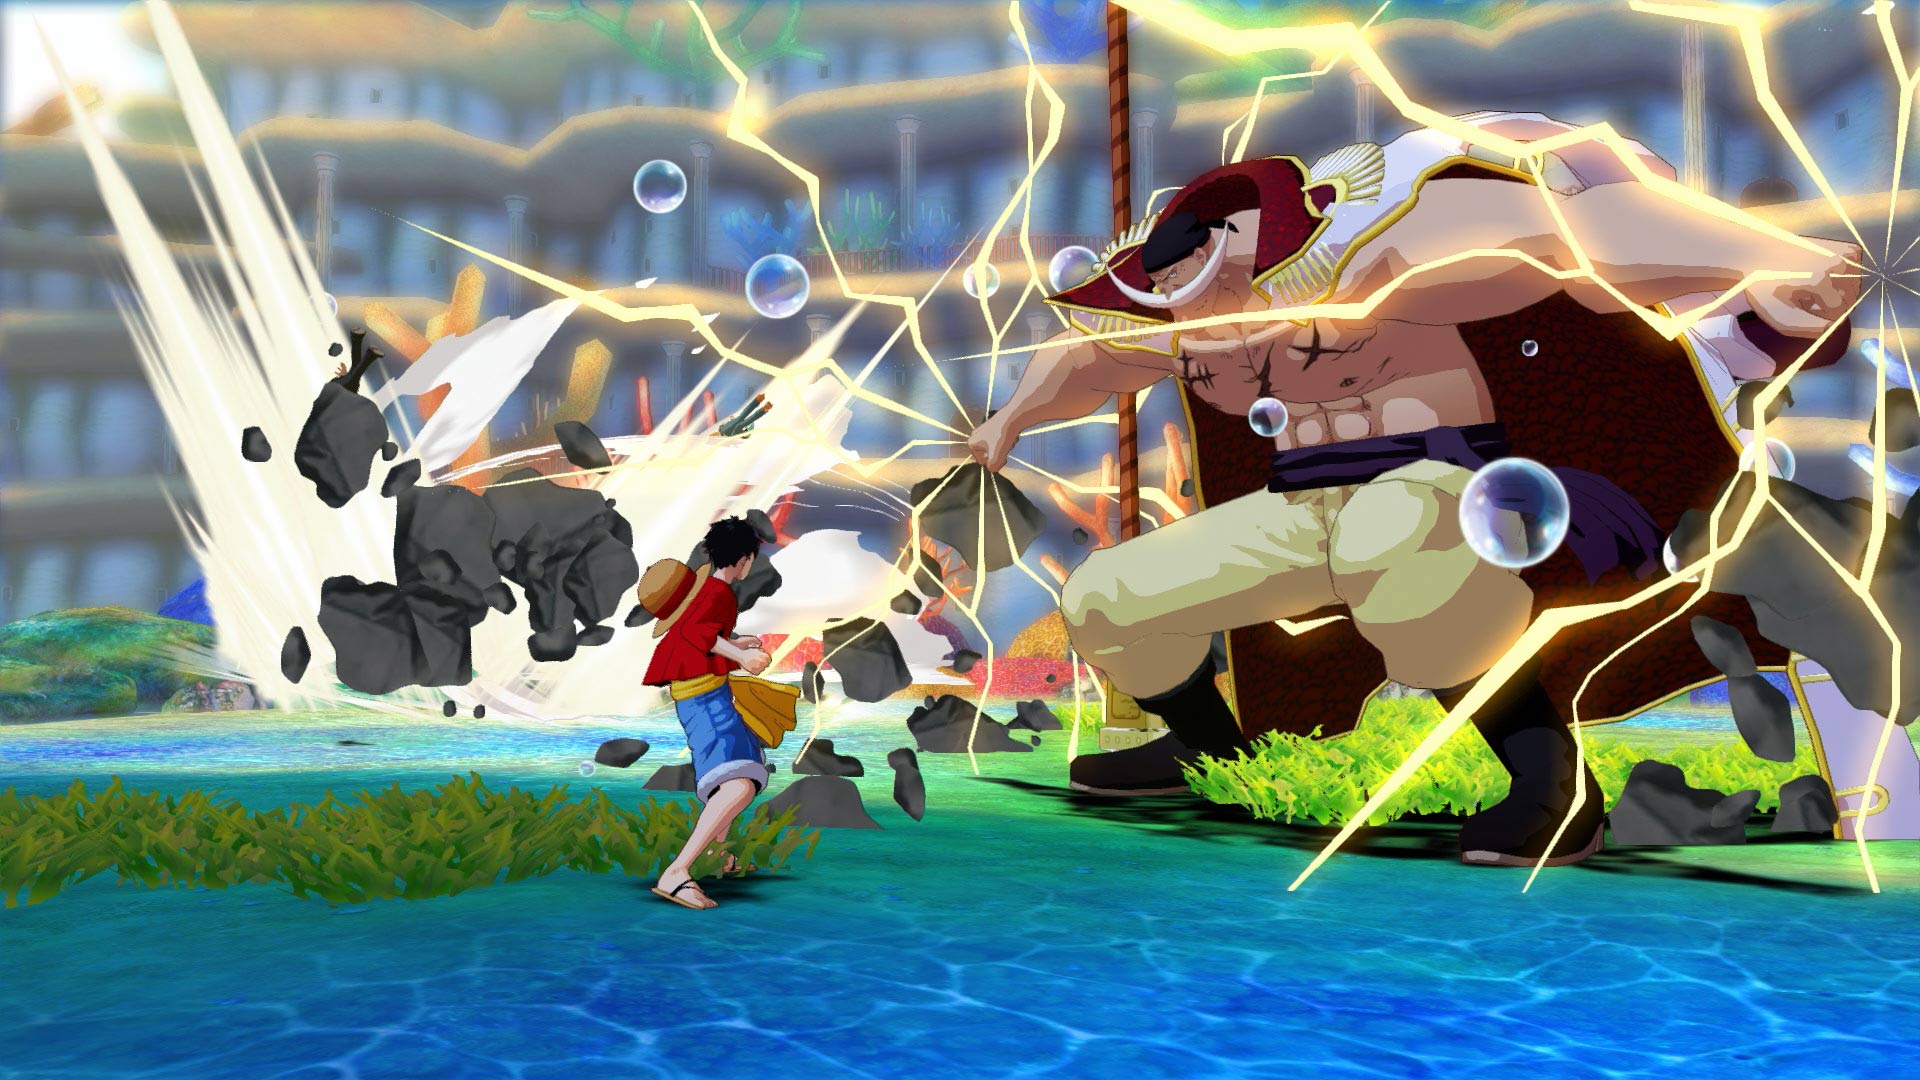 one piece unlimited world red